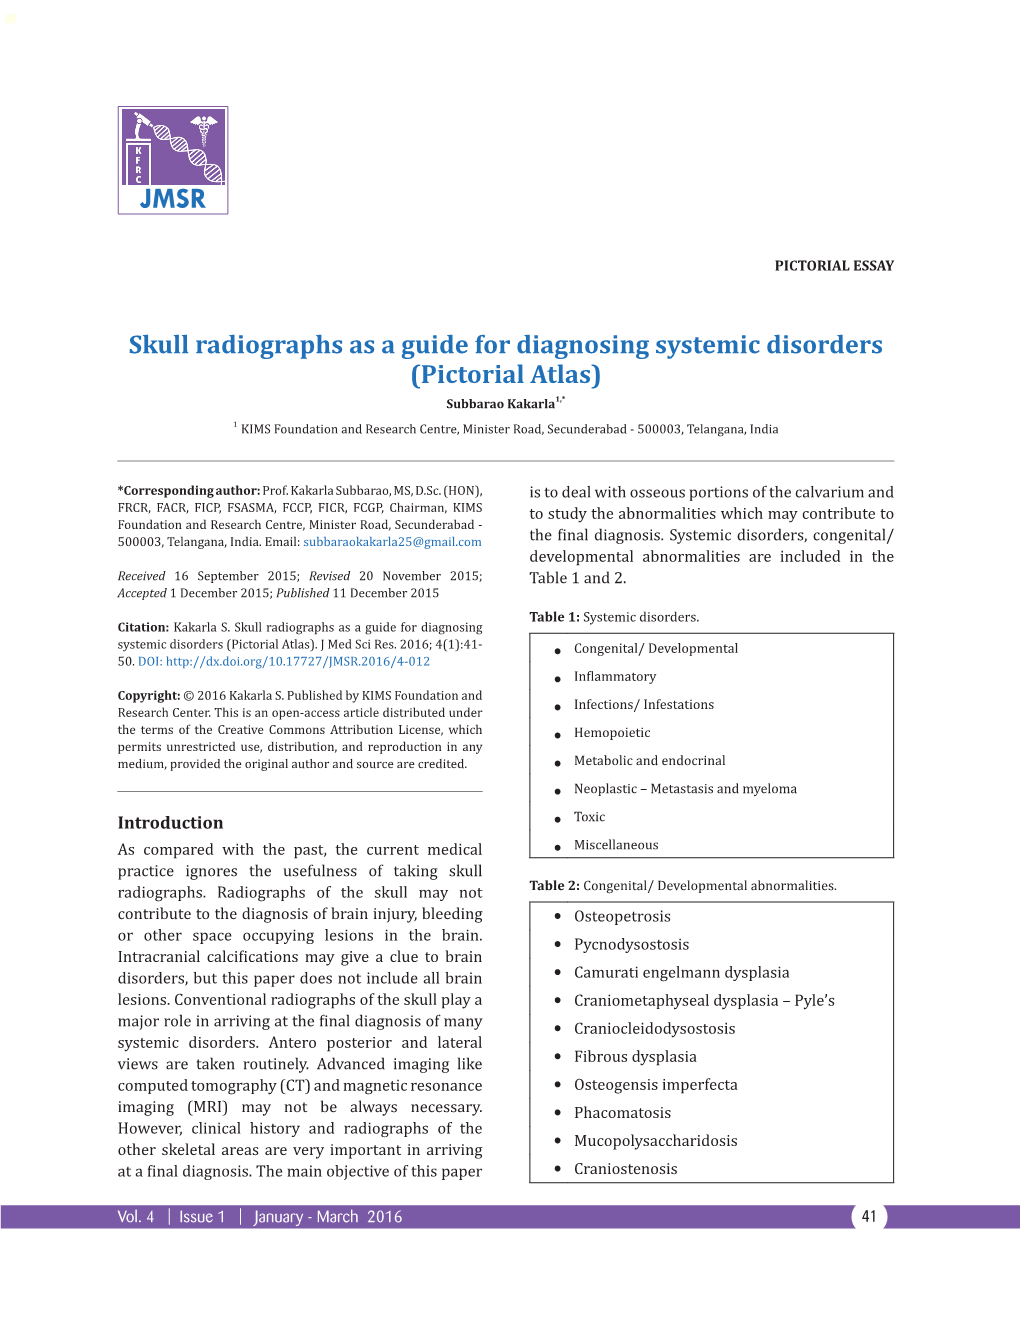 Skull Radiographs As a Guide for Diagnosing Systemic Disorders (Pictorial Atlas) Subbarao Kakarla1,*